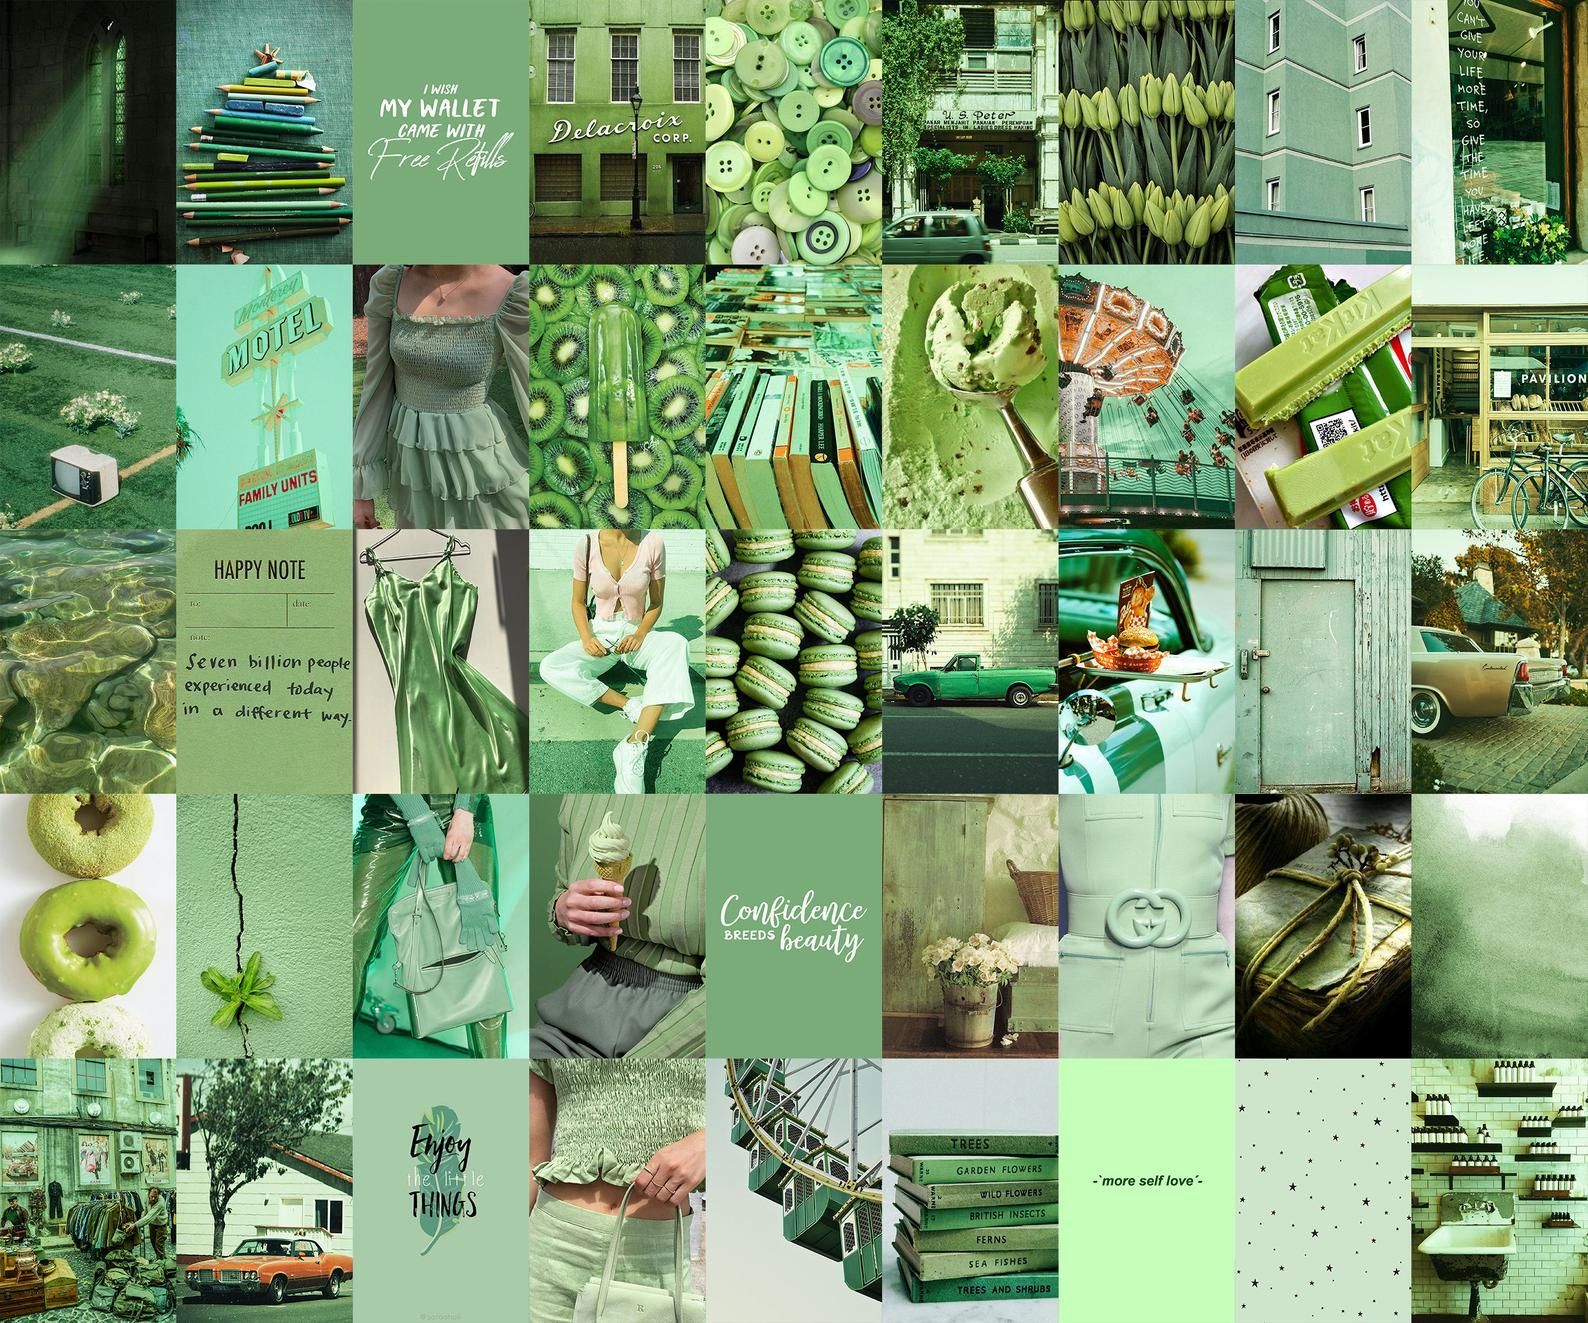 Evergreen Aesthetic Green Wall Collage Kit. Digital Copy. Pack of 50 photo. Collage kit. Green aesthetic, Dark green aesthetic, Wall collage